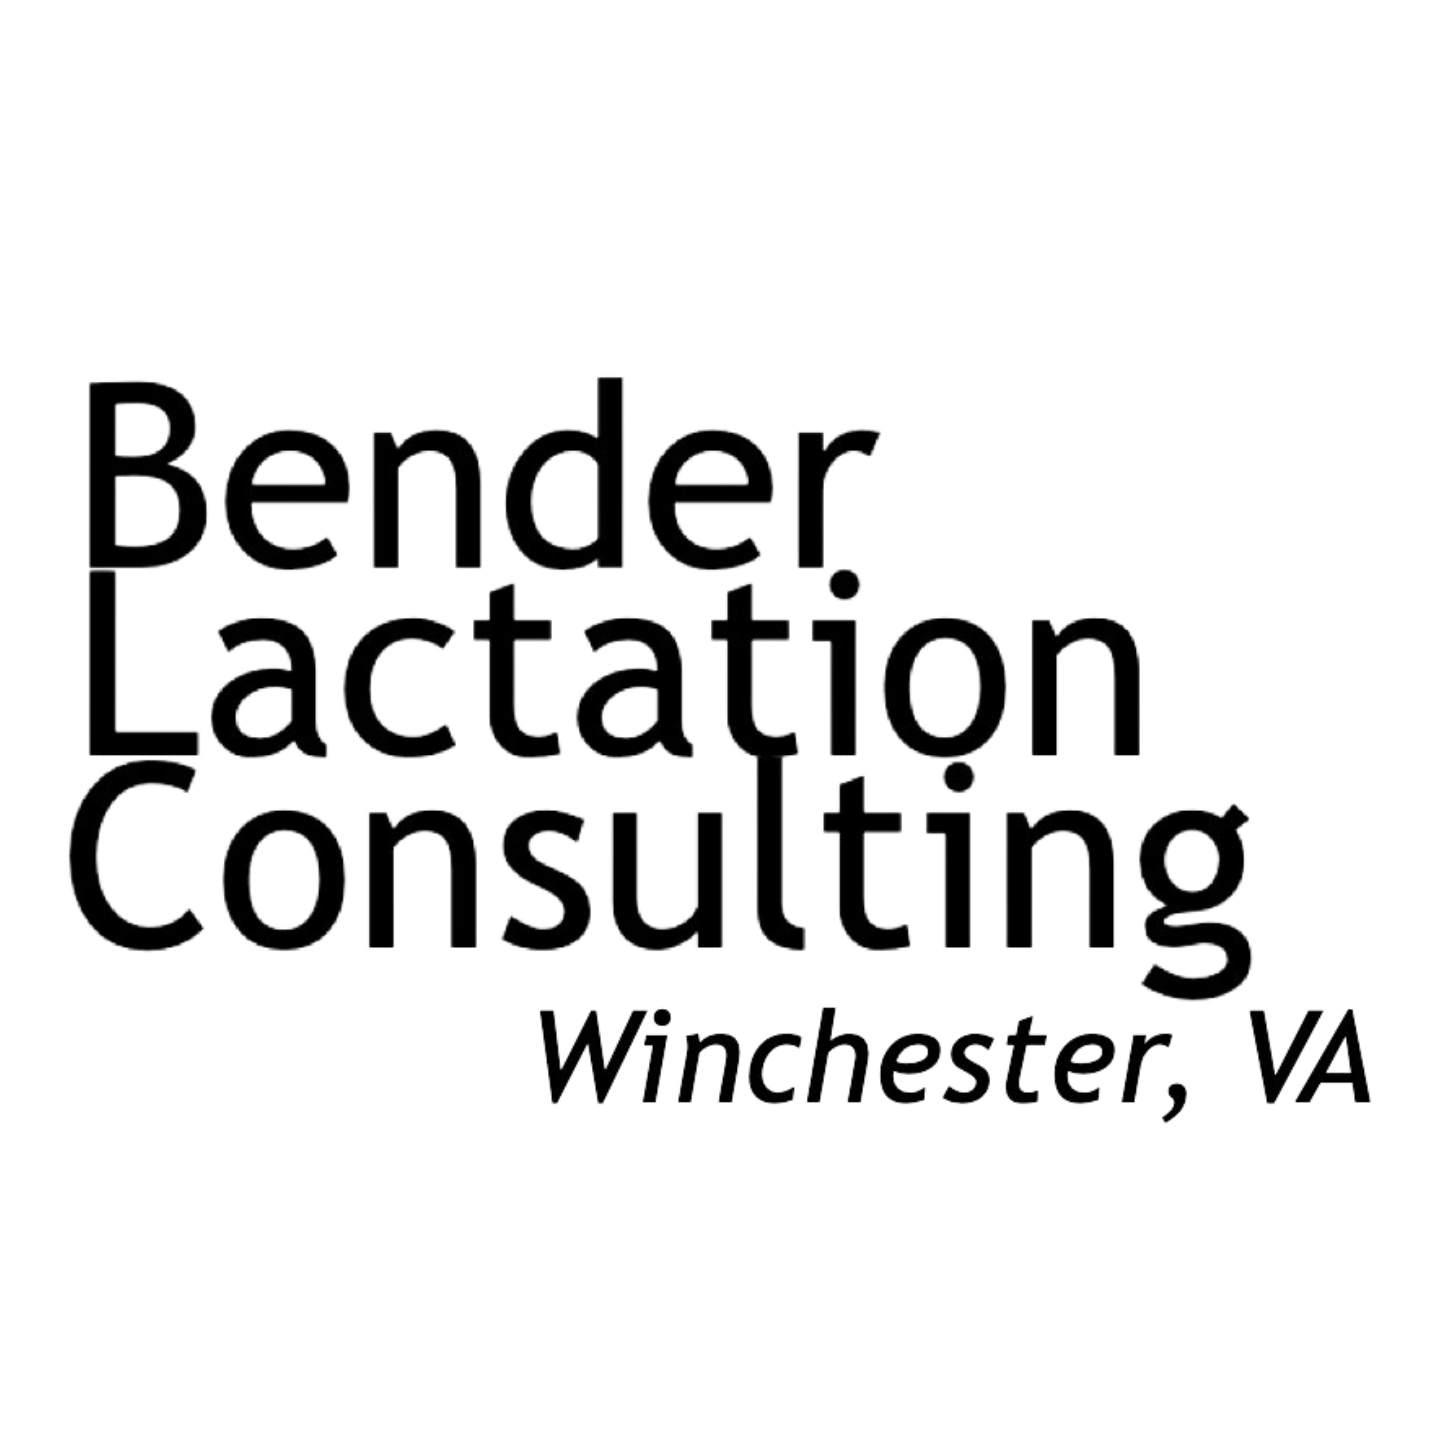 Bender Lactation Consulting